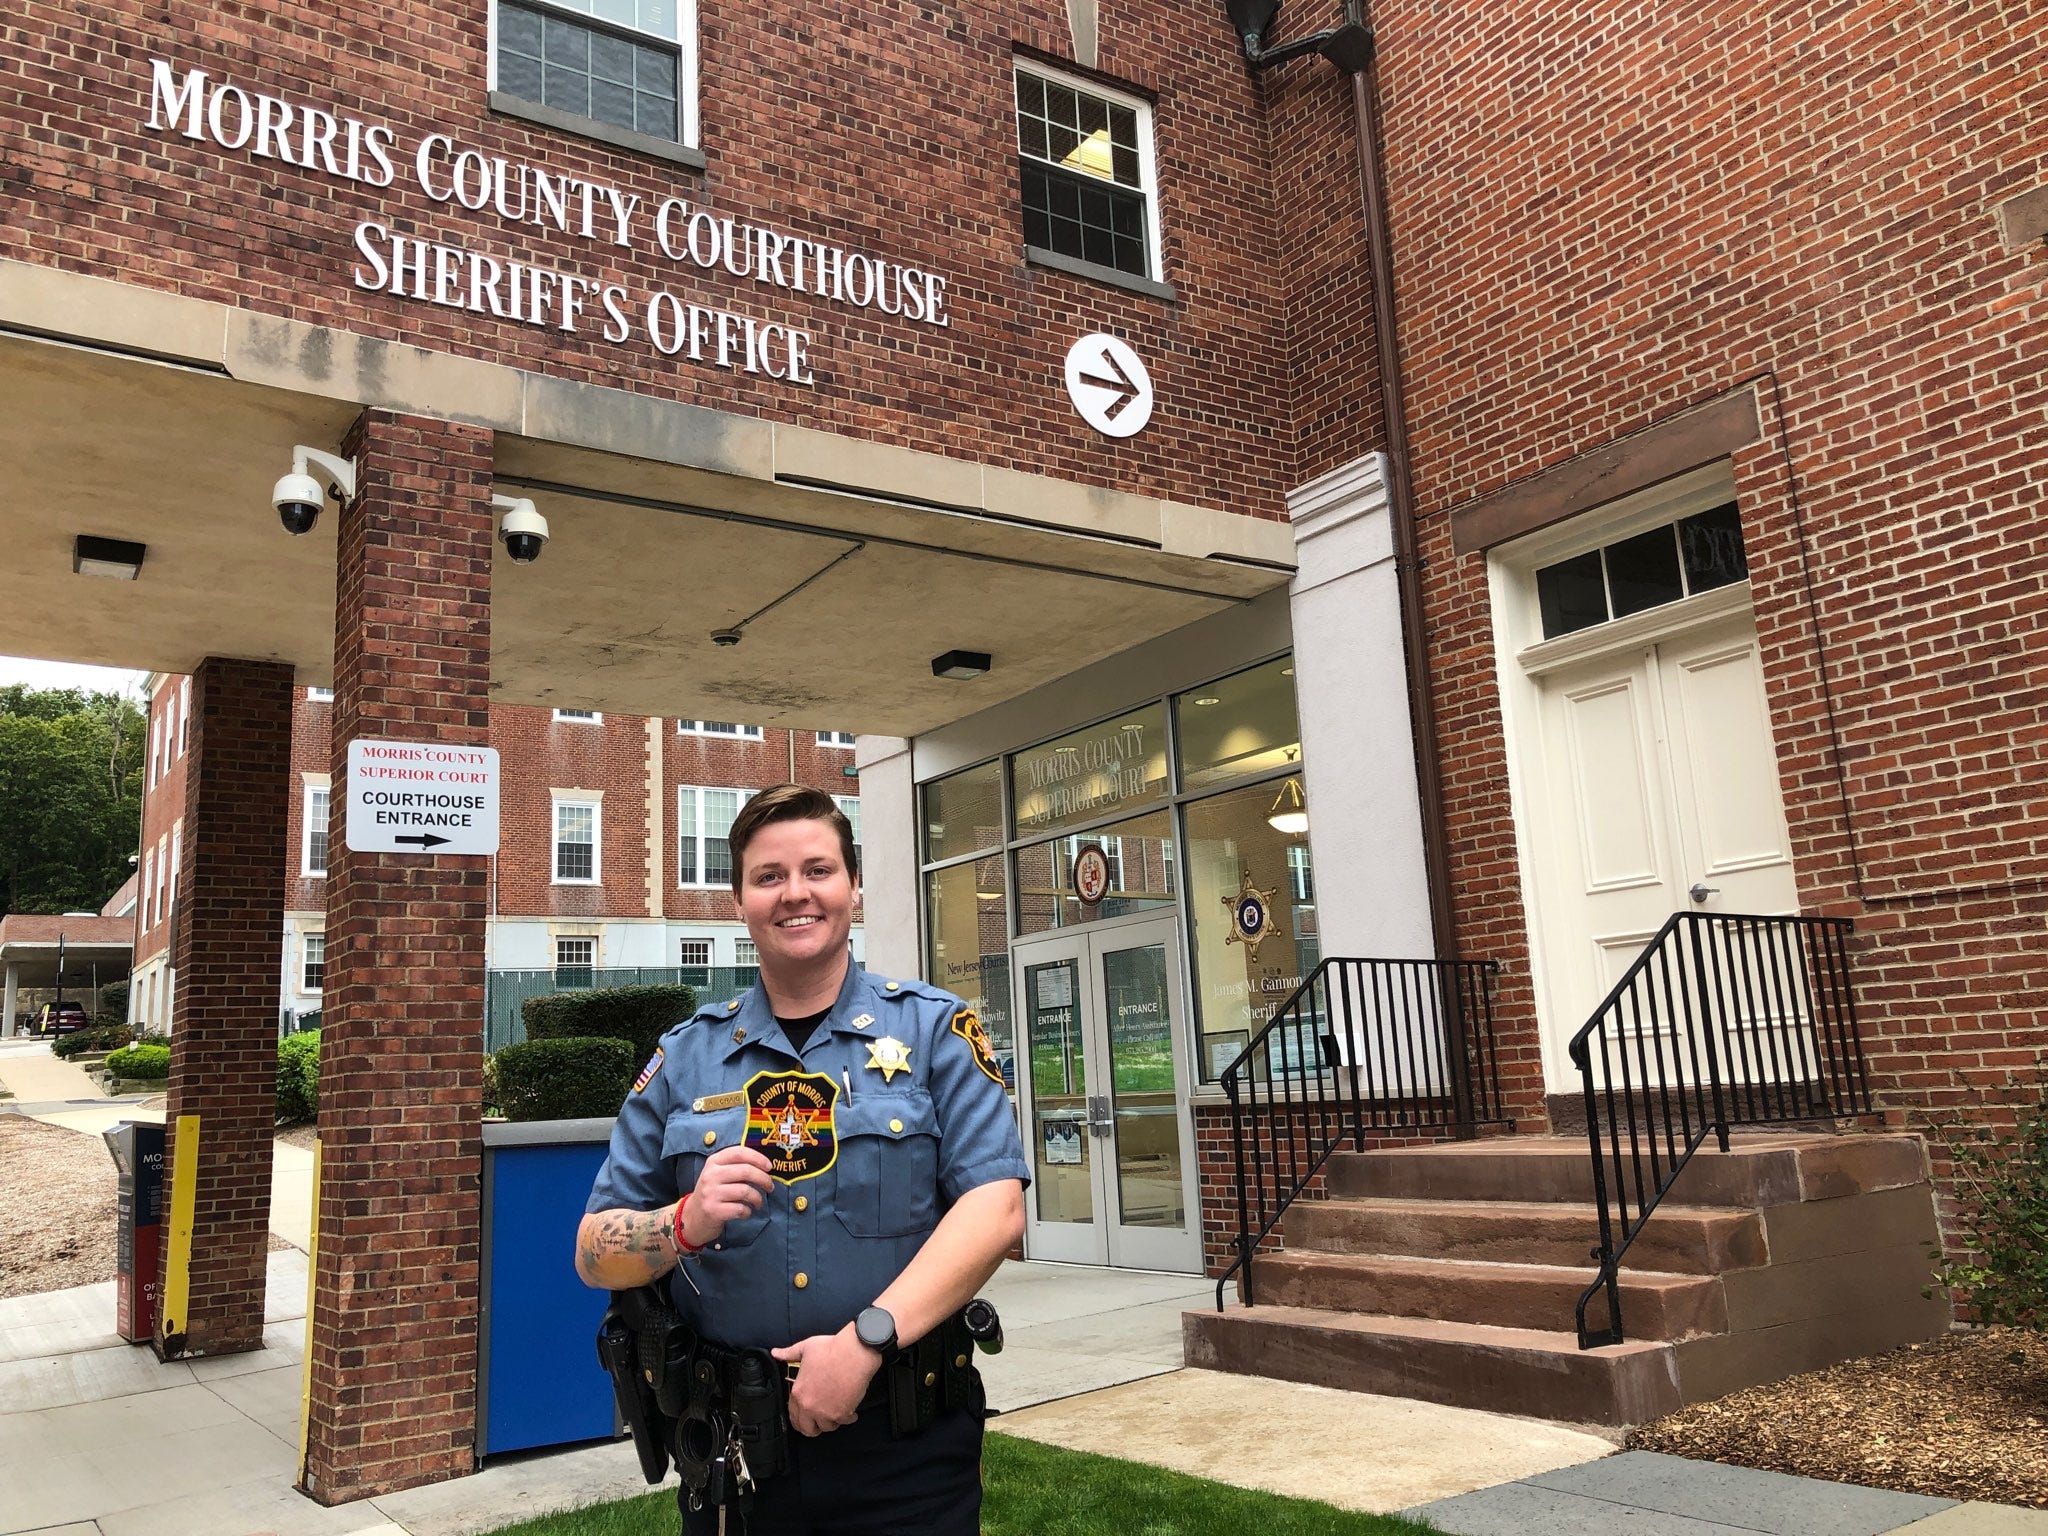 Image of Morris County Sheriff's Office